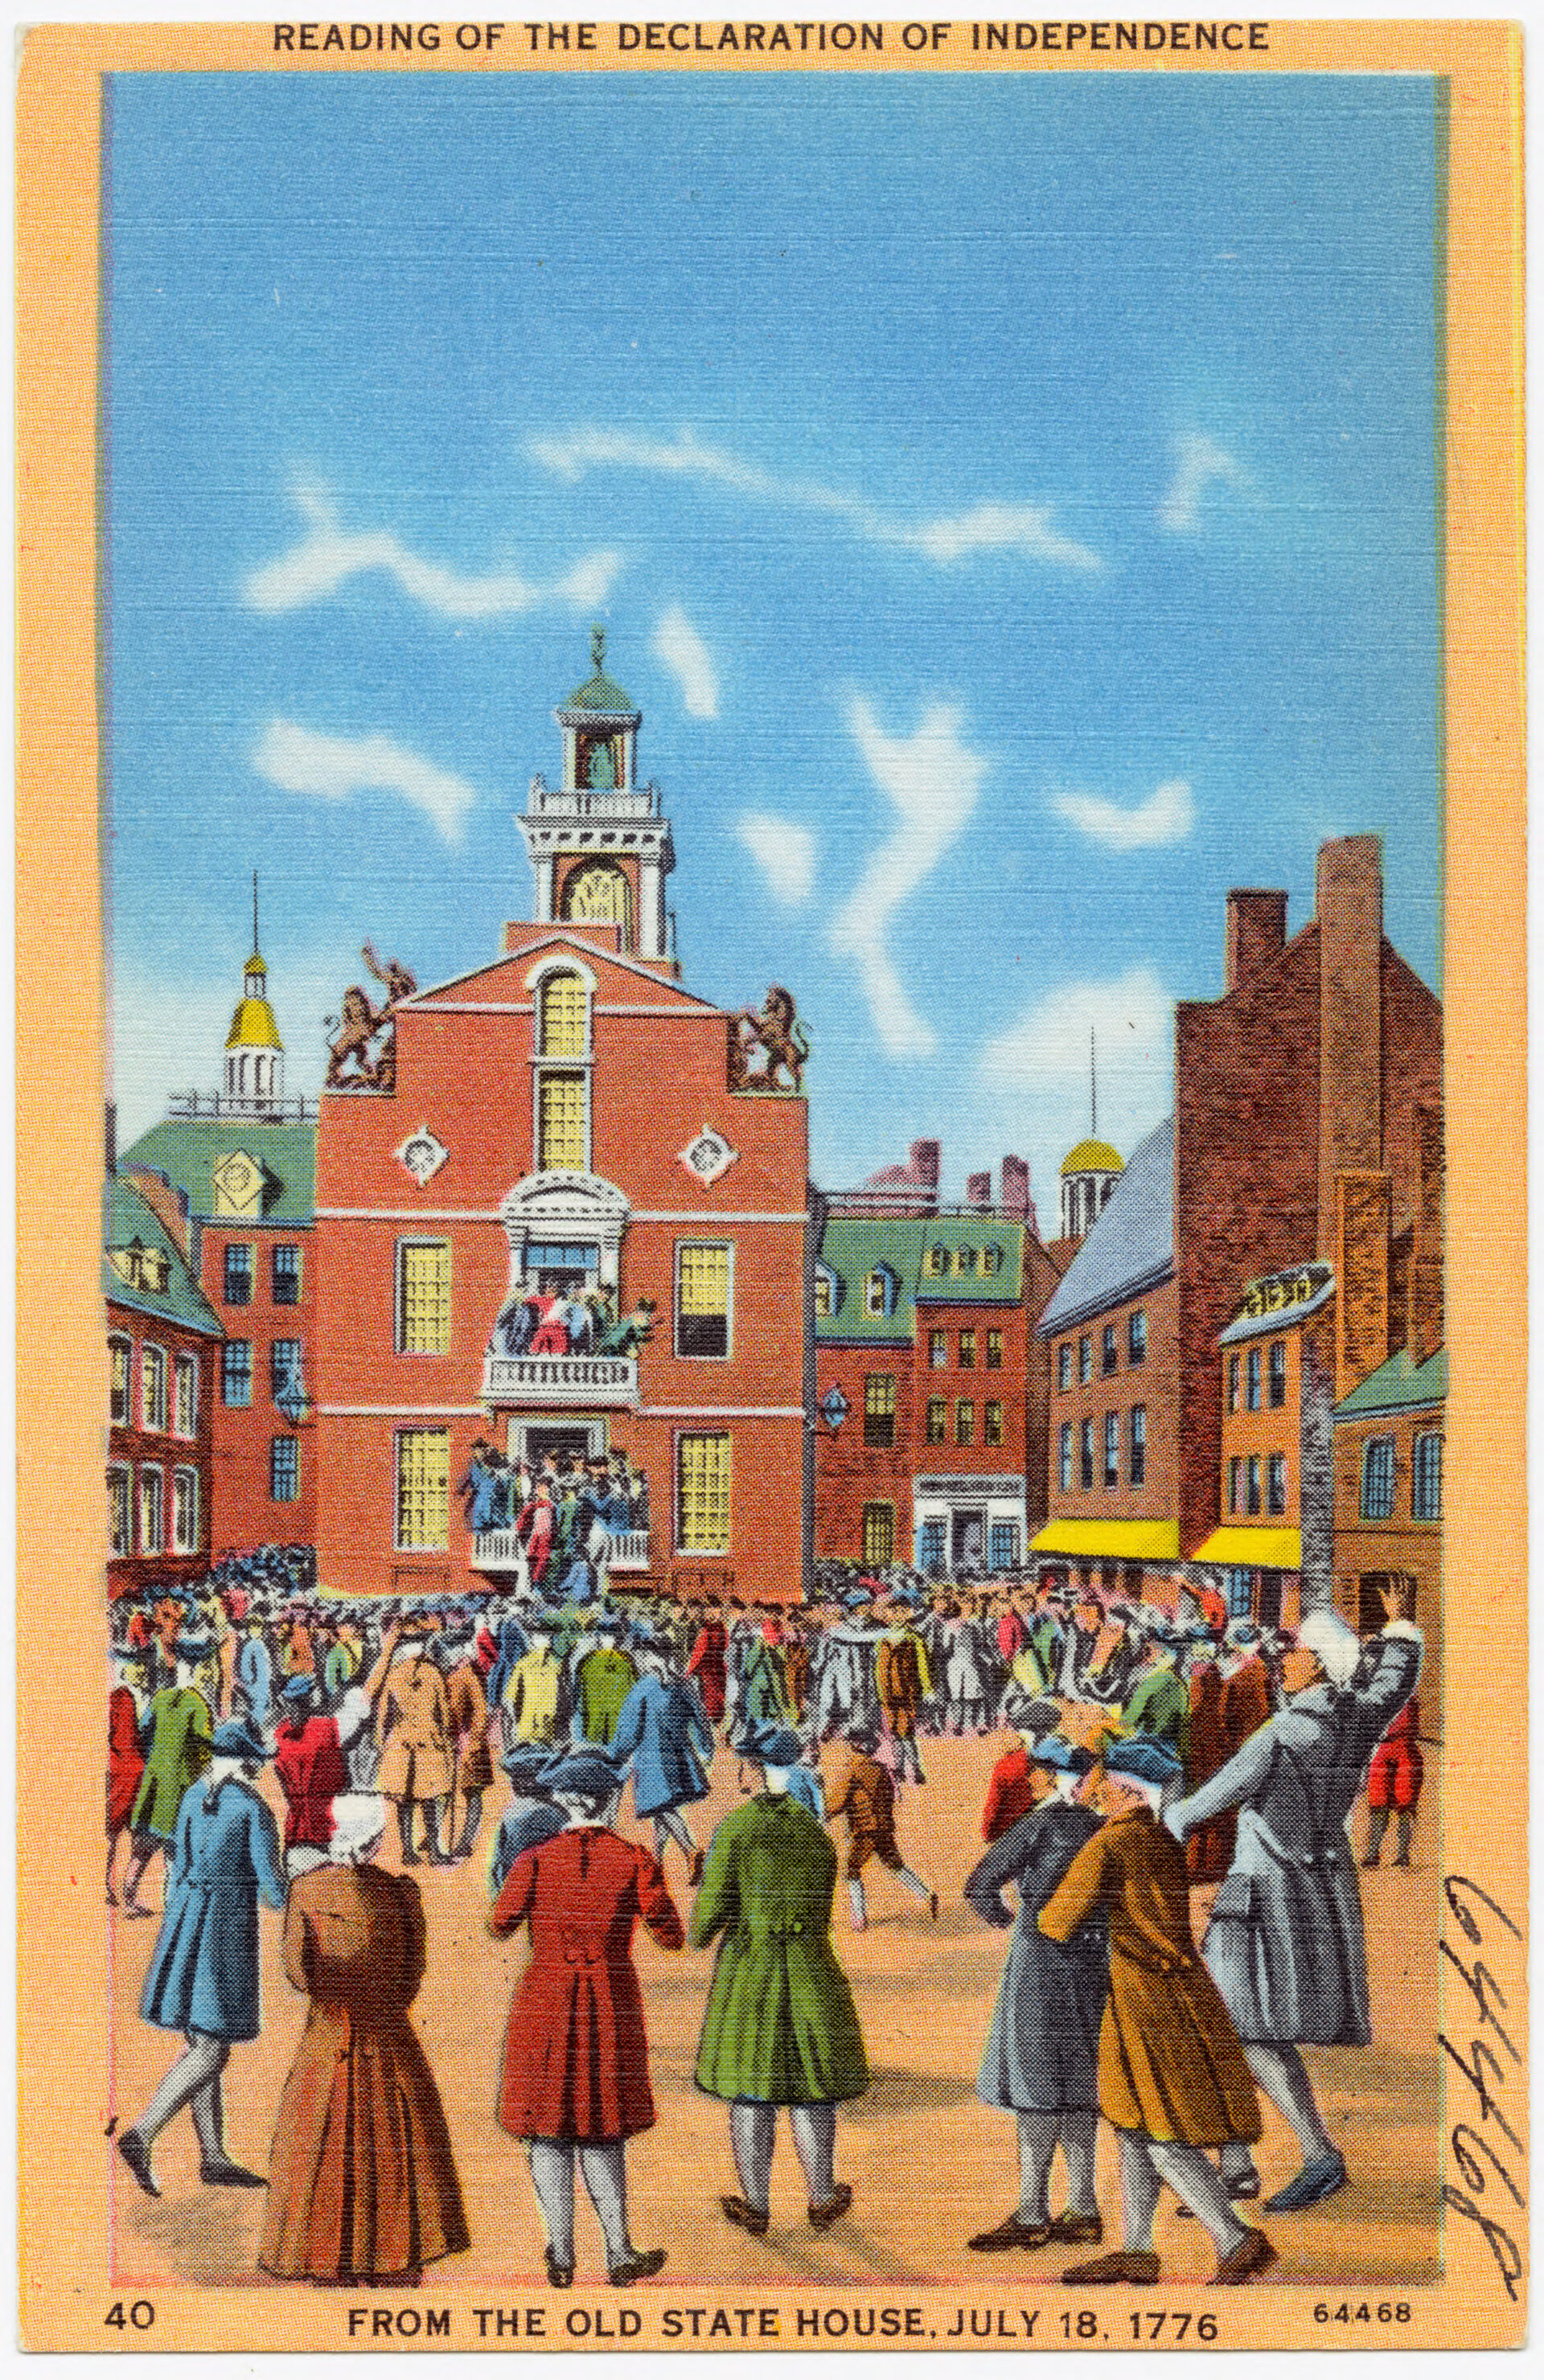 A postcard from the mid-1900s depicts the historic reading of the declaration of independence from the old state house on July 18th 1776